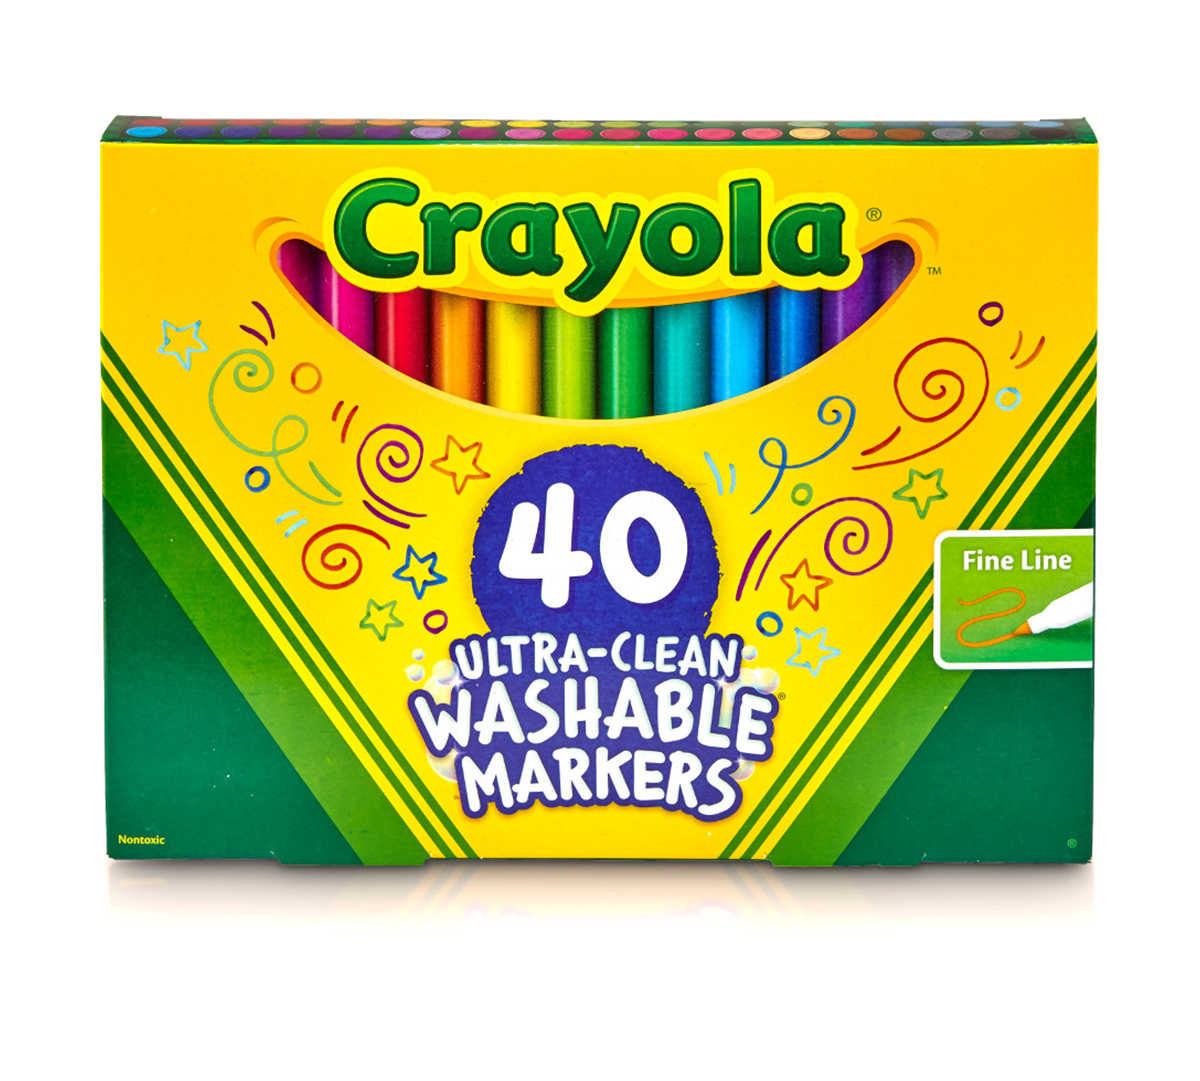 https://shop.crayola.com/on/demandware.static/-/Sites-crayola-storefront/default/dwf4caac55/images/58-7861-0-200_Ultra-Clean-Washable-Markers_FL_40ct_PDP-1_F1.png